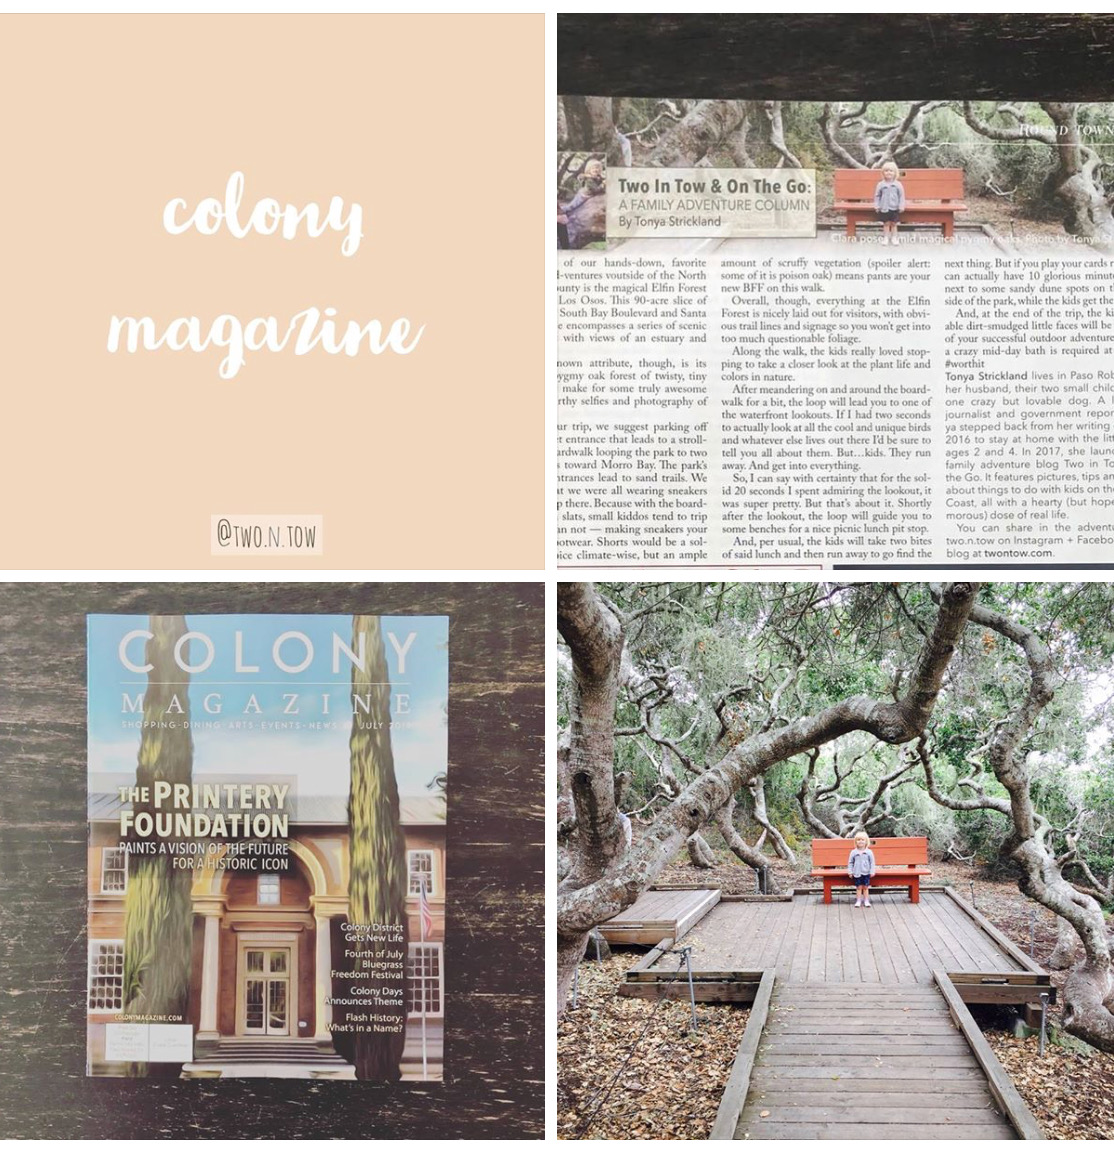 Two in Tow & On THe Go featured in Atascadero's new Colony Magazine